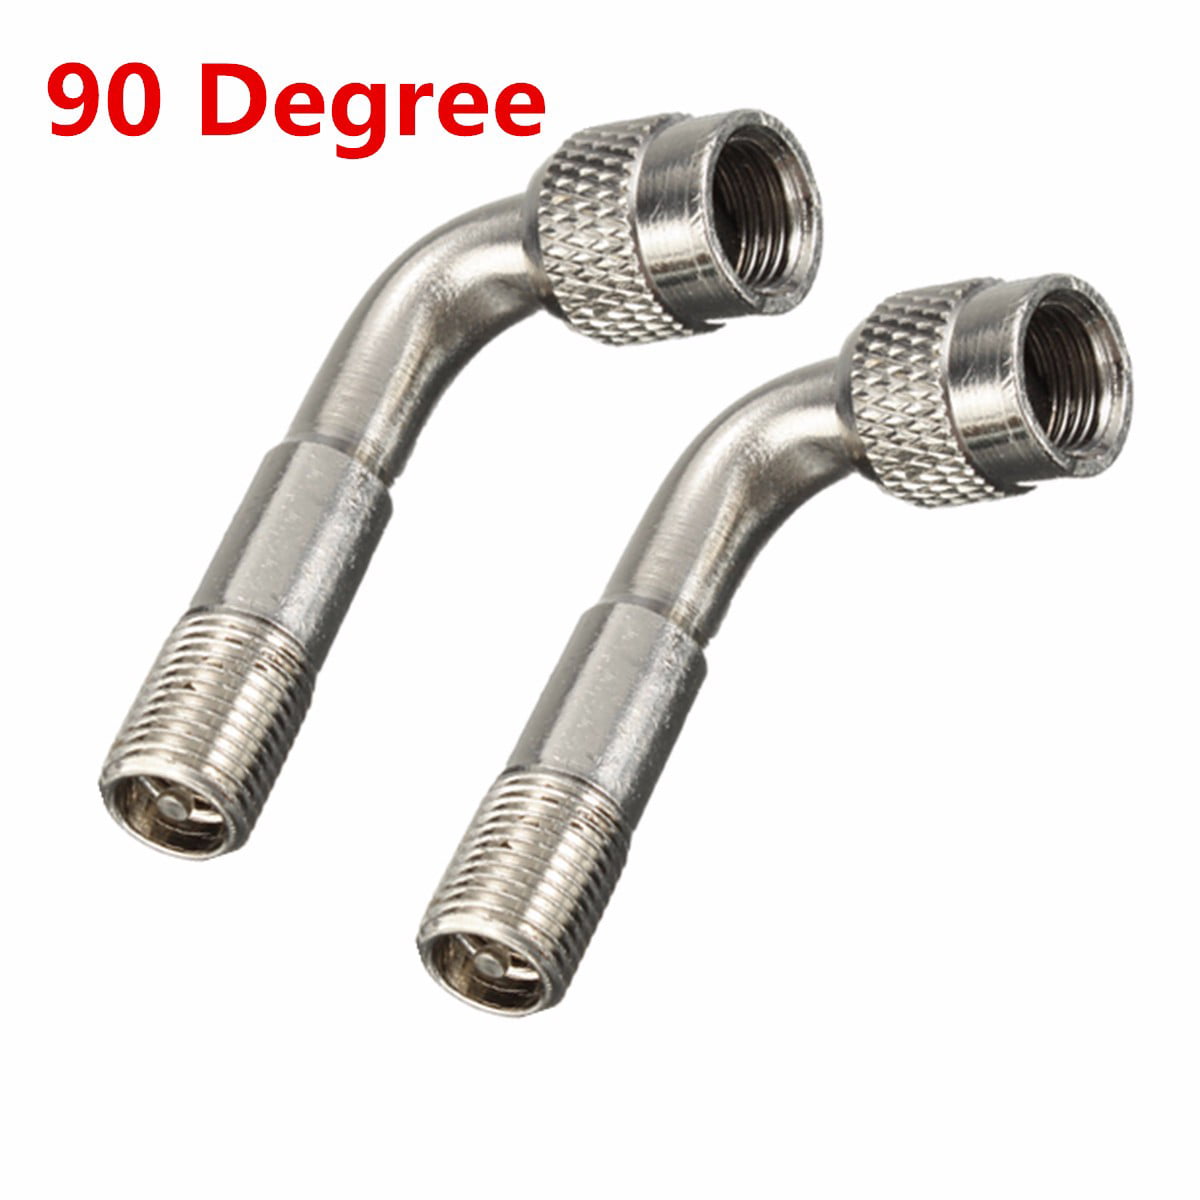 90° Alamor 45/90/135 Degree Angle Valve Adaptor Tyre Extension Adapter For Motorcycles Cars Bike